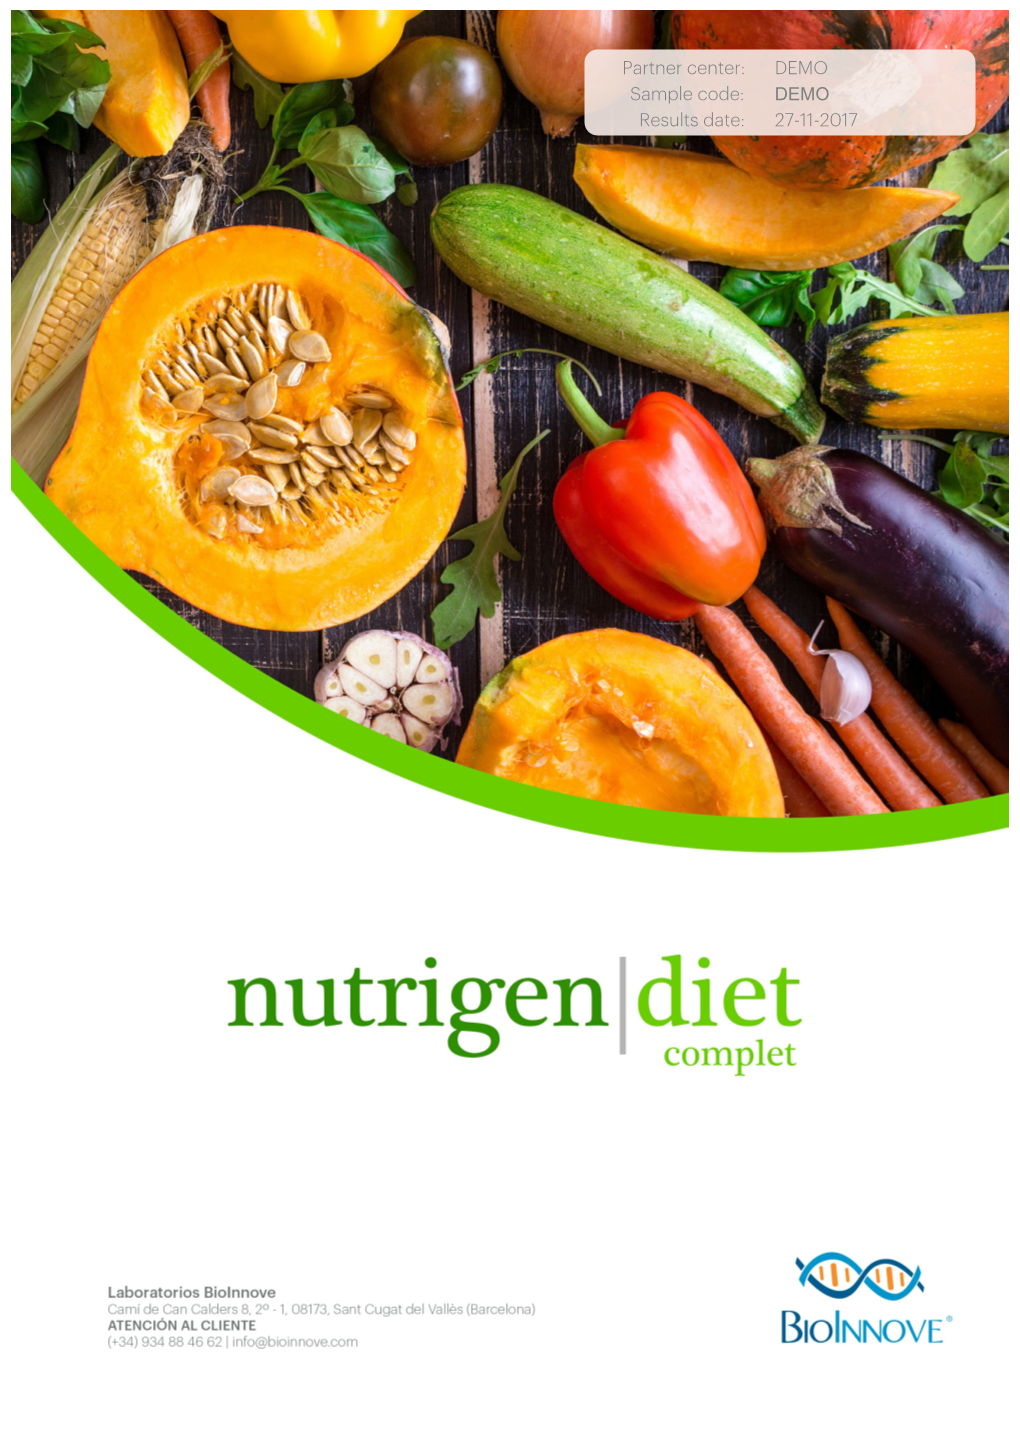 DEMO Sample Code: DEMO Results Date: 27-11-2017 How to Read and Use the Nutrigen ® Bioinnove Report?